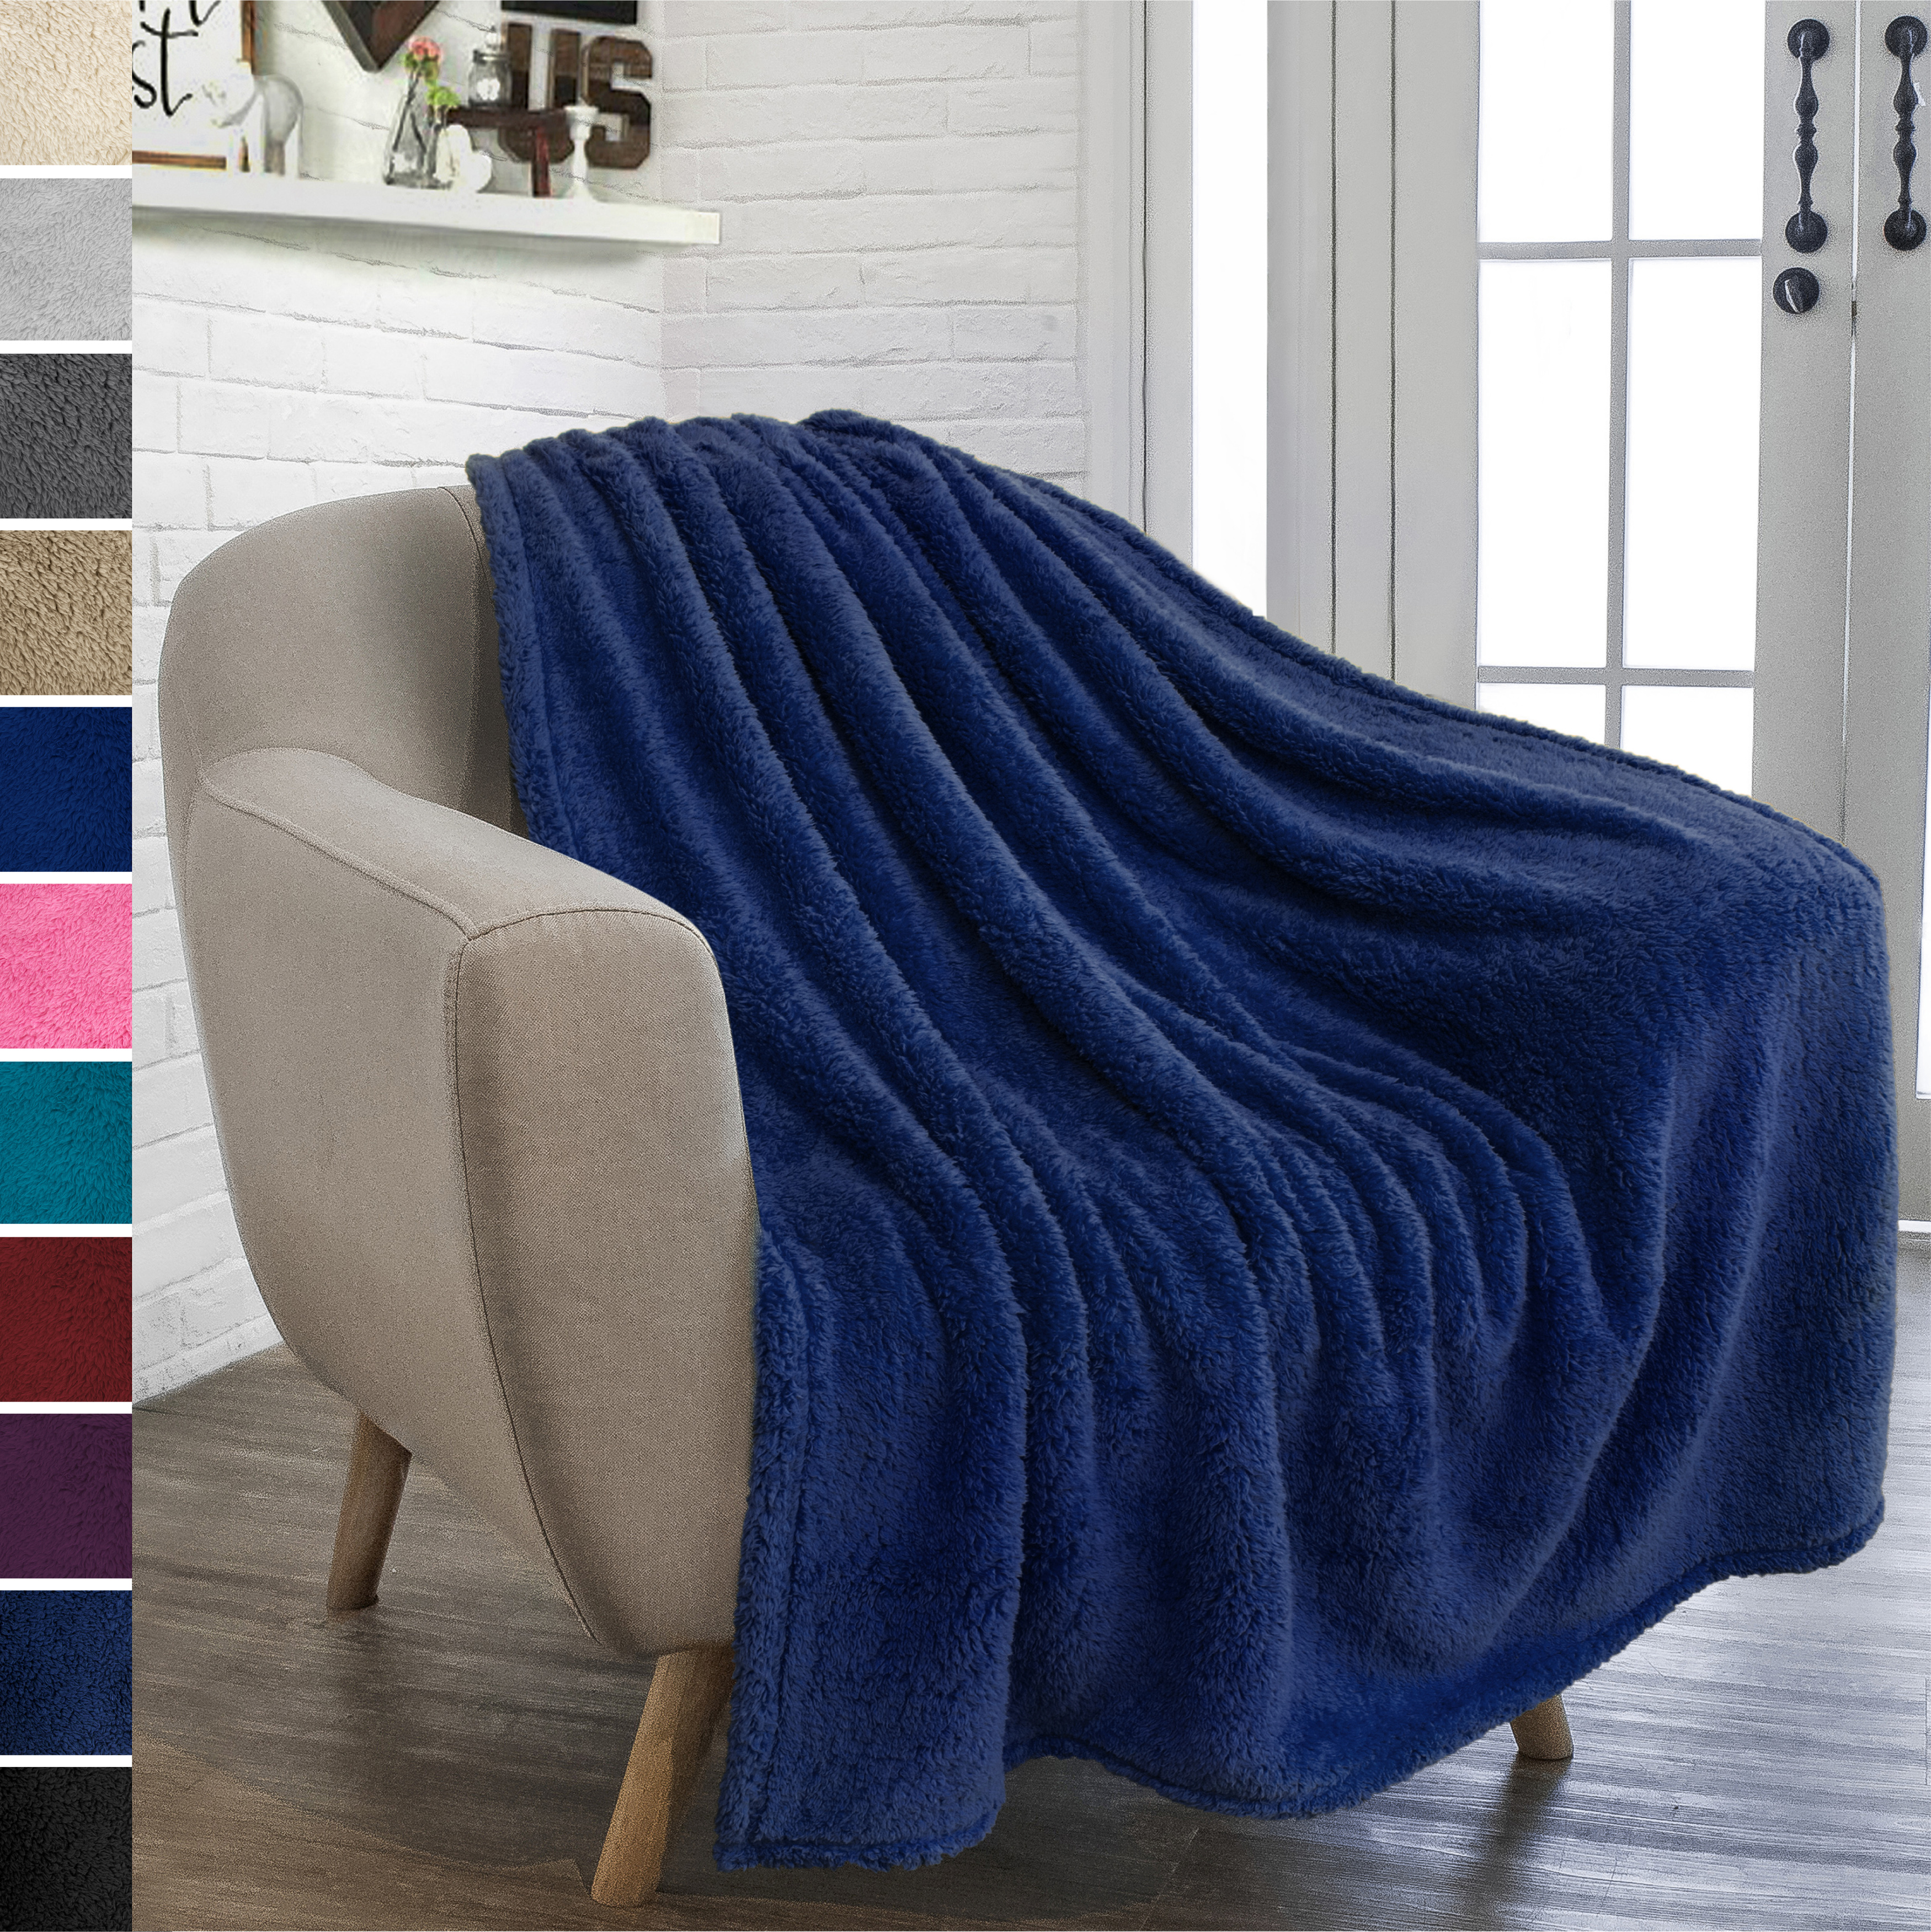 GUANN Ultra Soft Micro Fleece Blanket Abstract Autumn Soft and Warm Throw Blanket for Bed Couch Living Room 